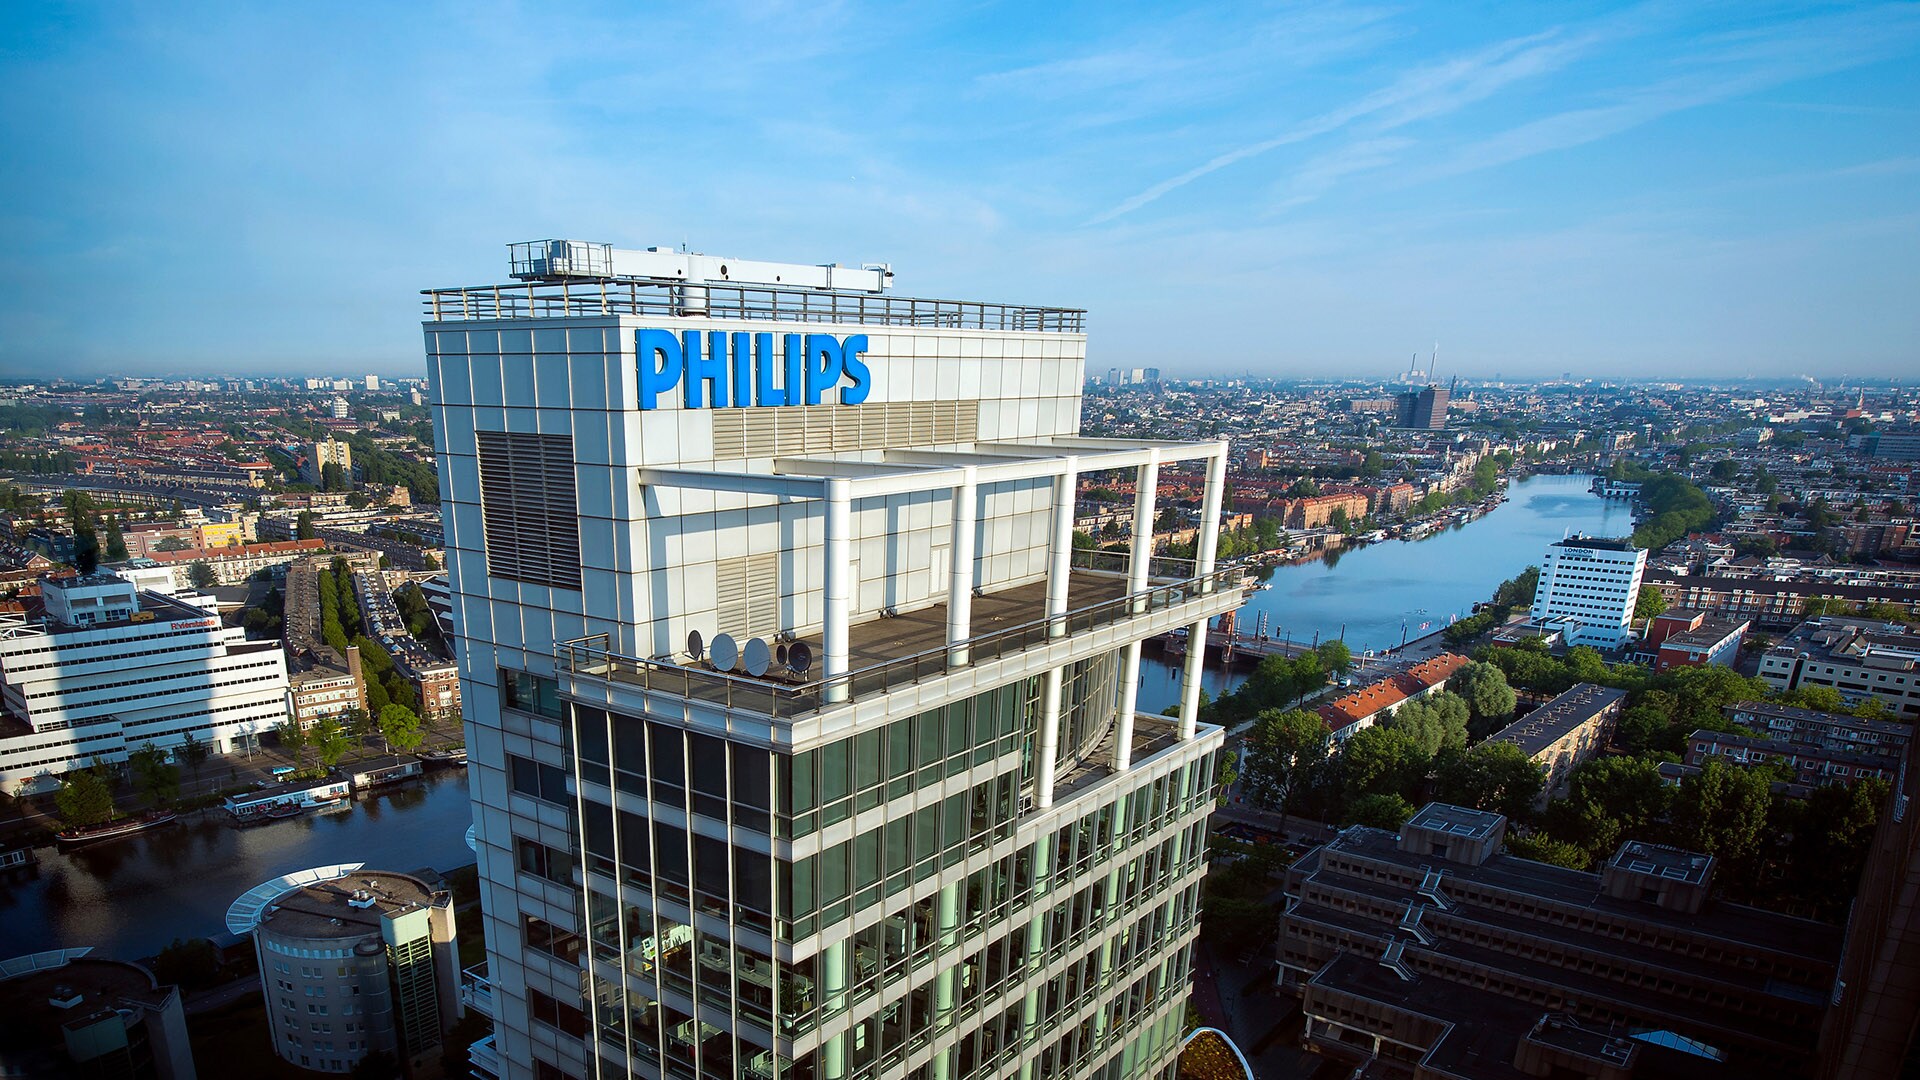 Philips presents its plan to create value with sustainable impact